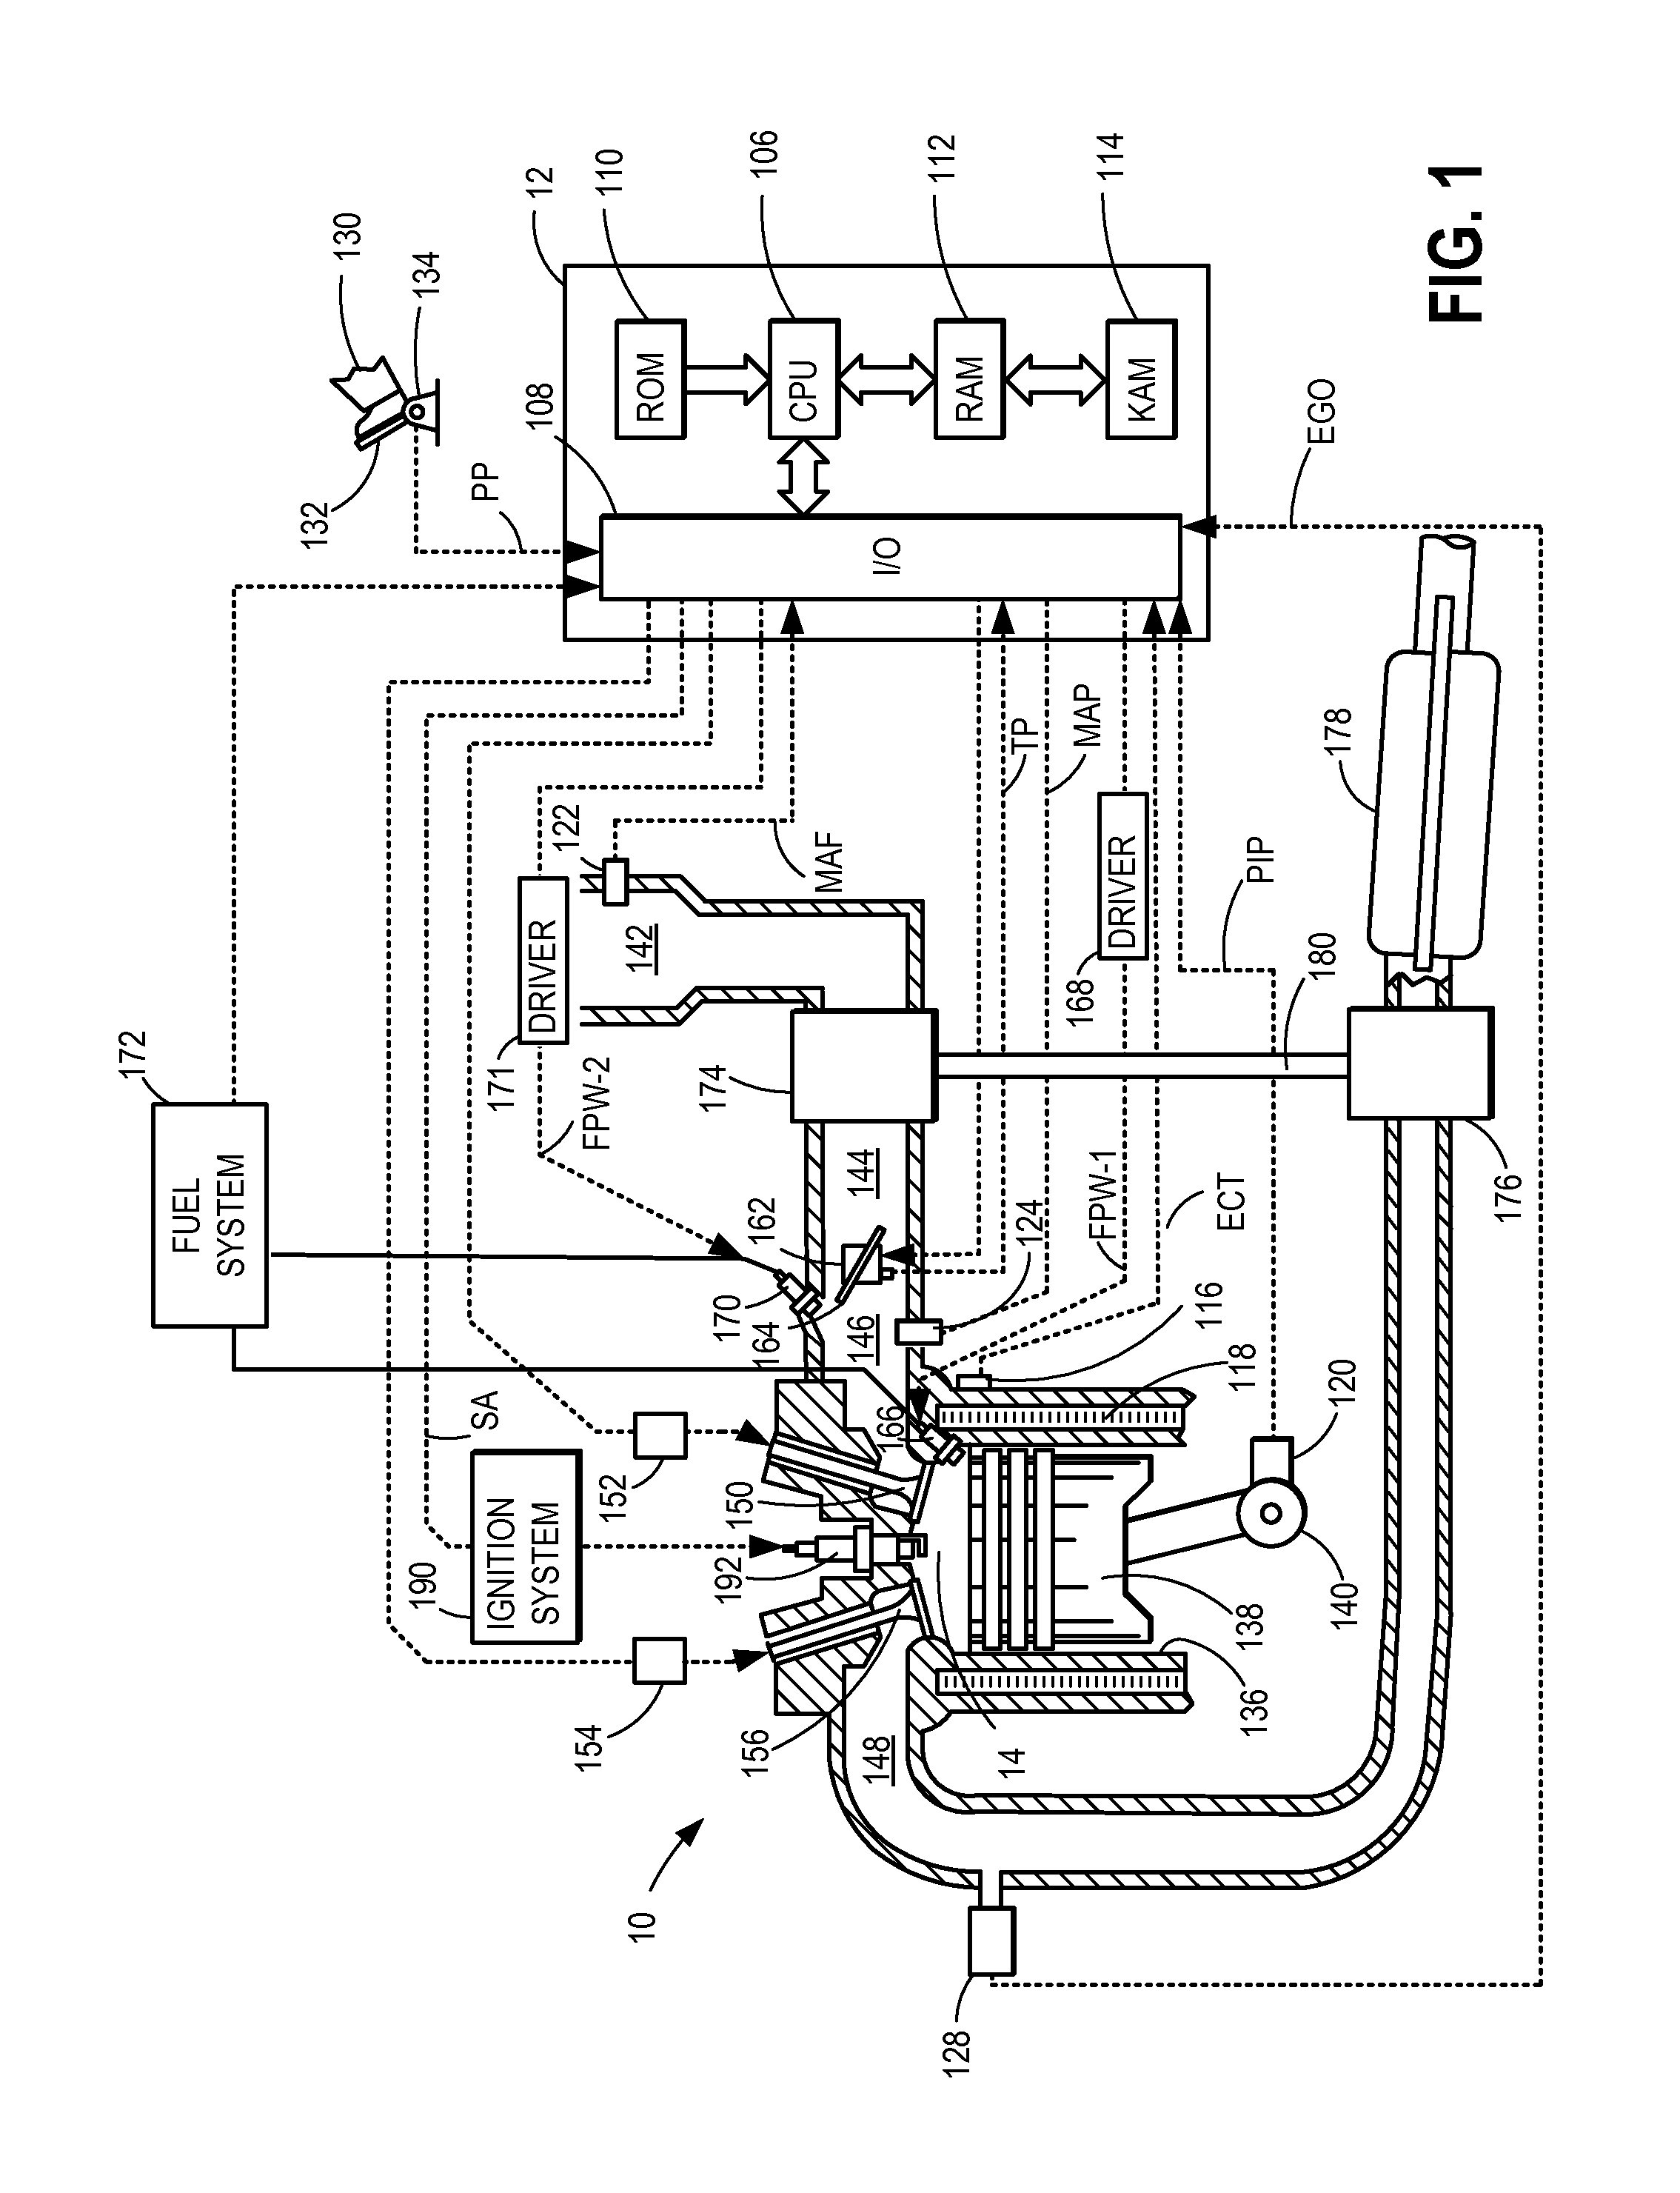 Method and system for engine cold start and hot start control